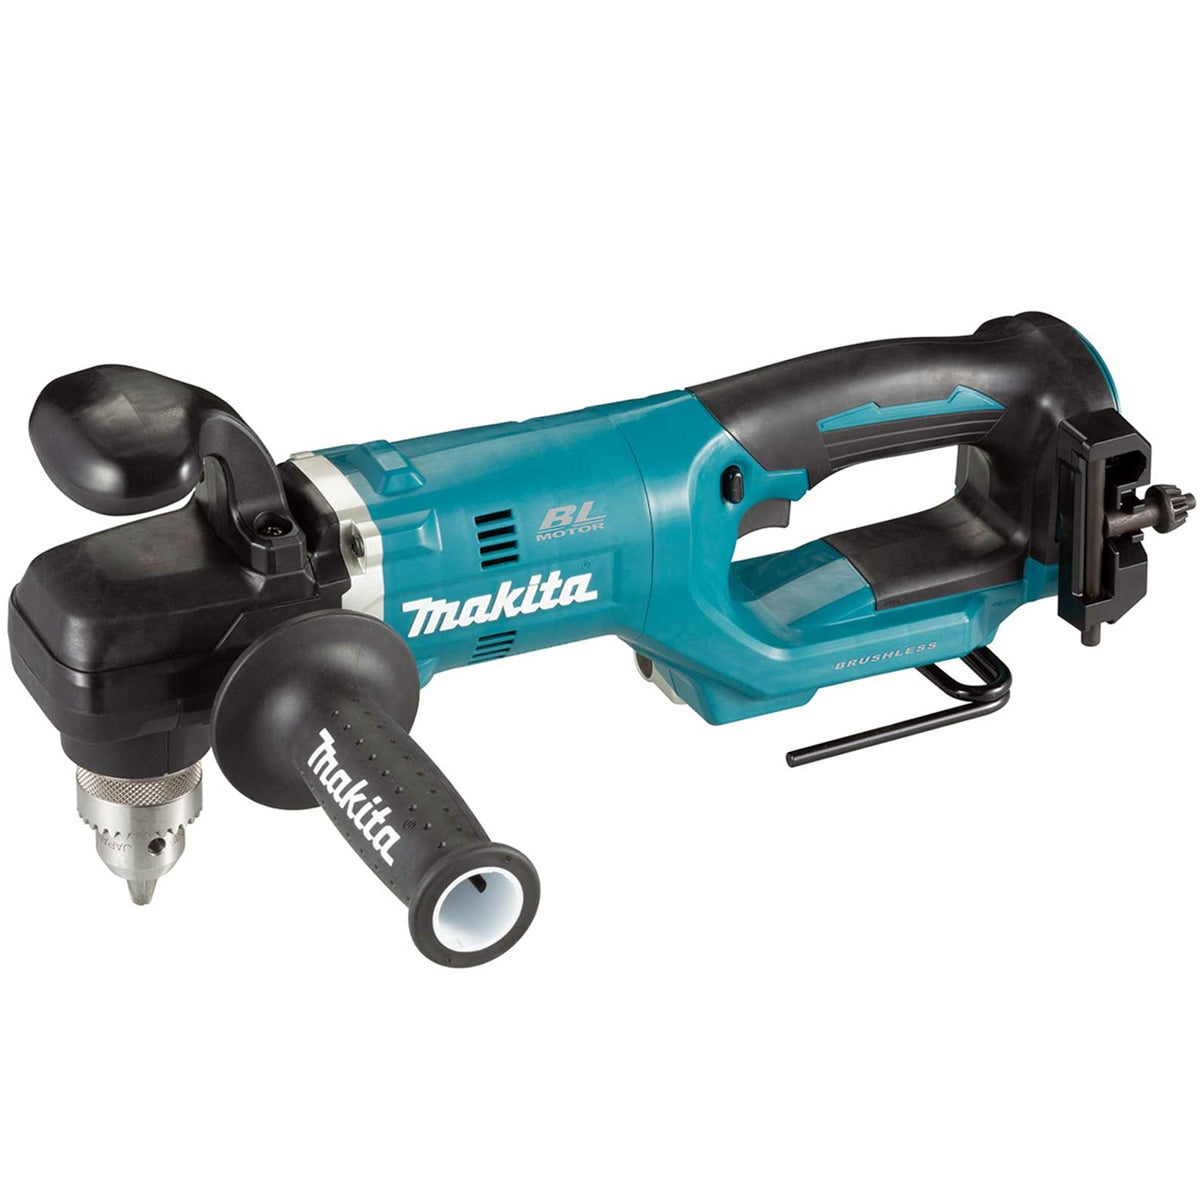 Makita DDA450ZK 18V LXT Brushless Angle Drill With 1 x 5.0Ah Battery & Case